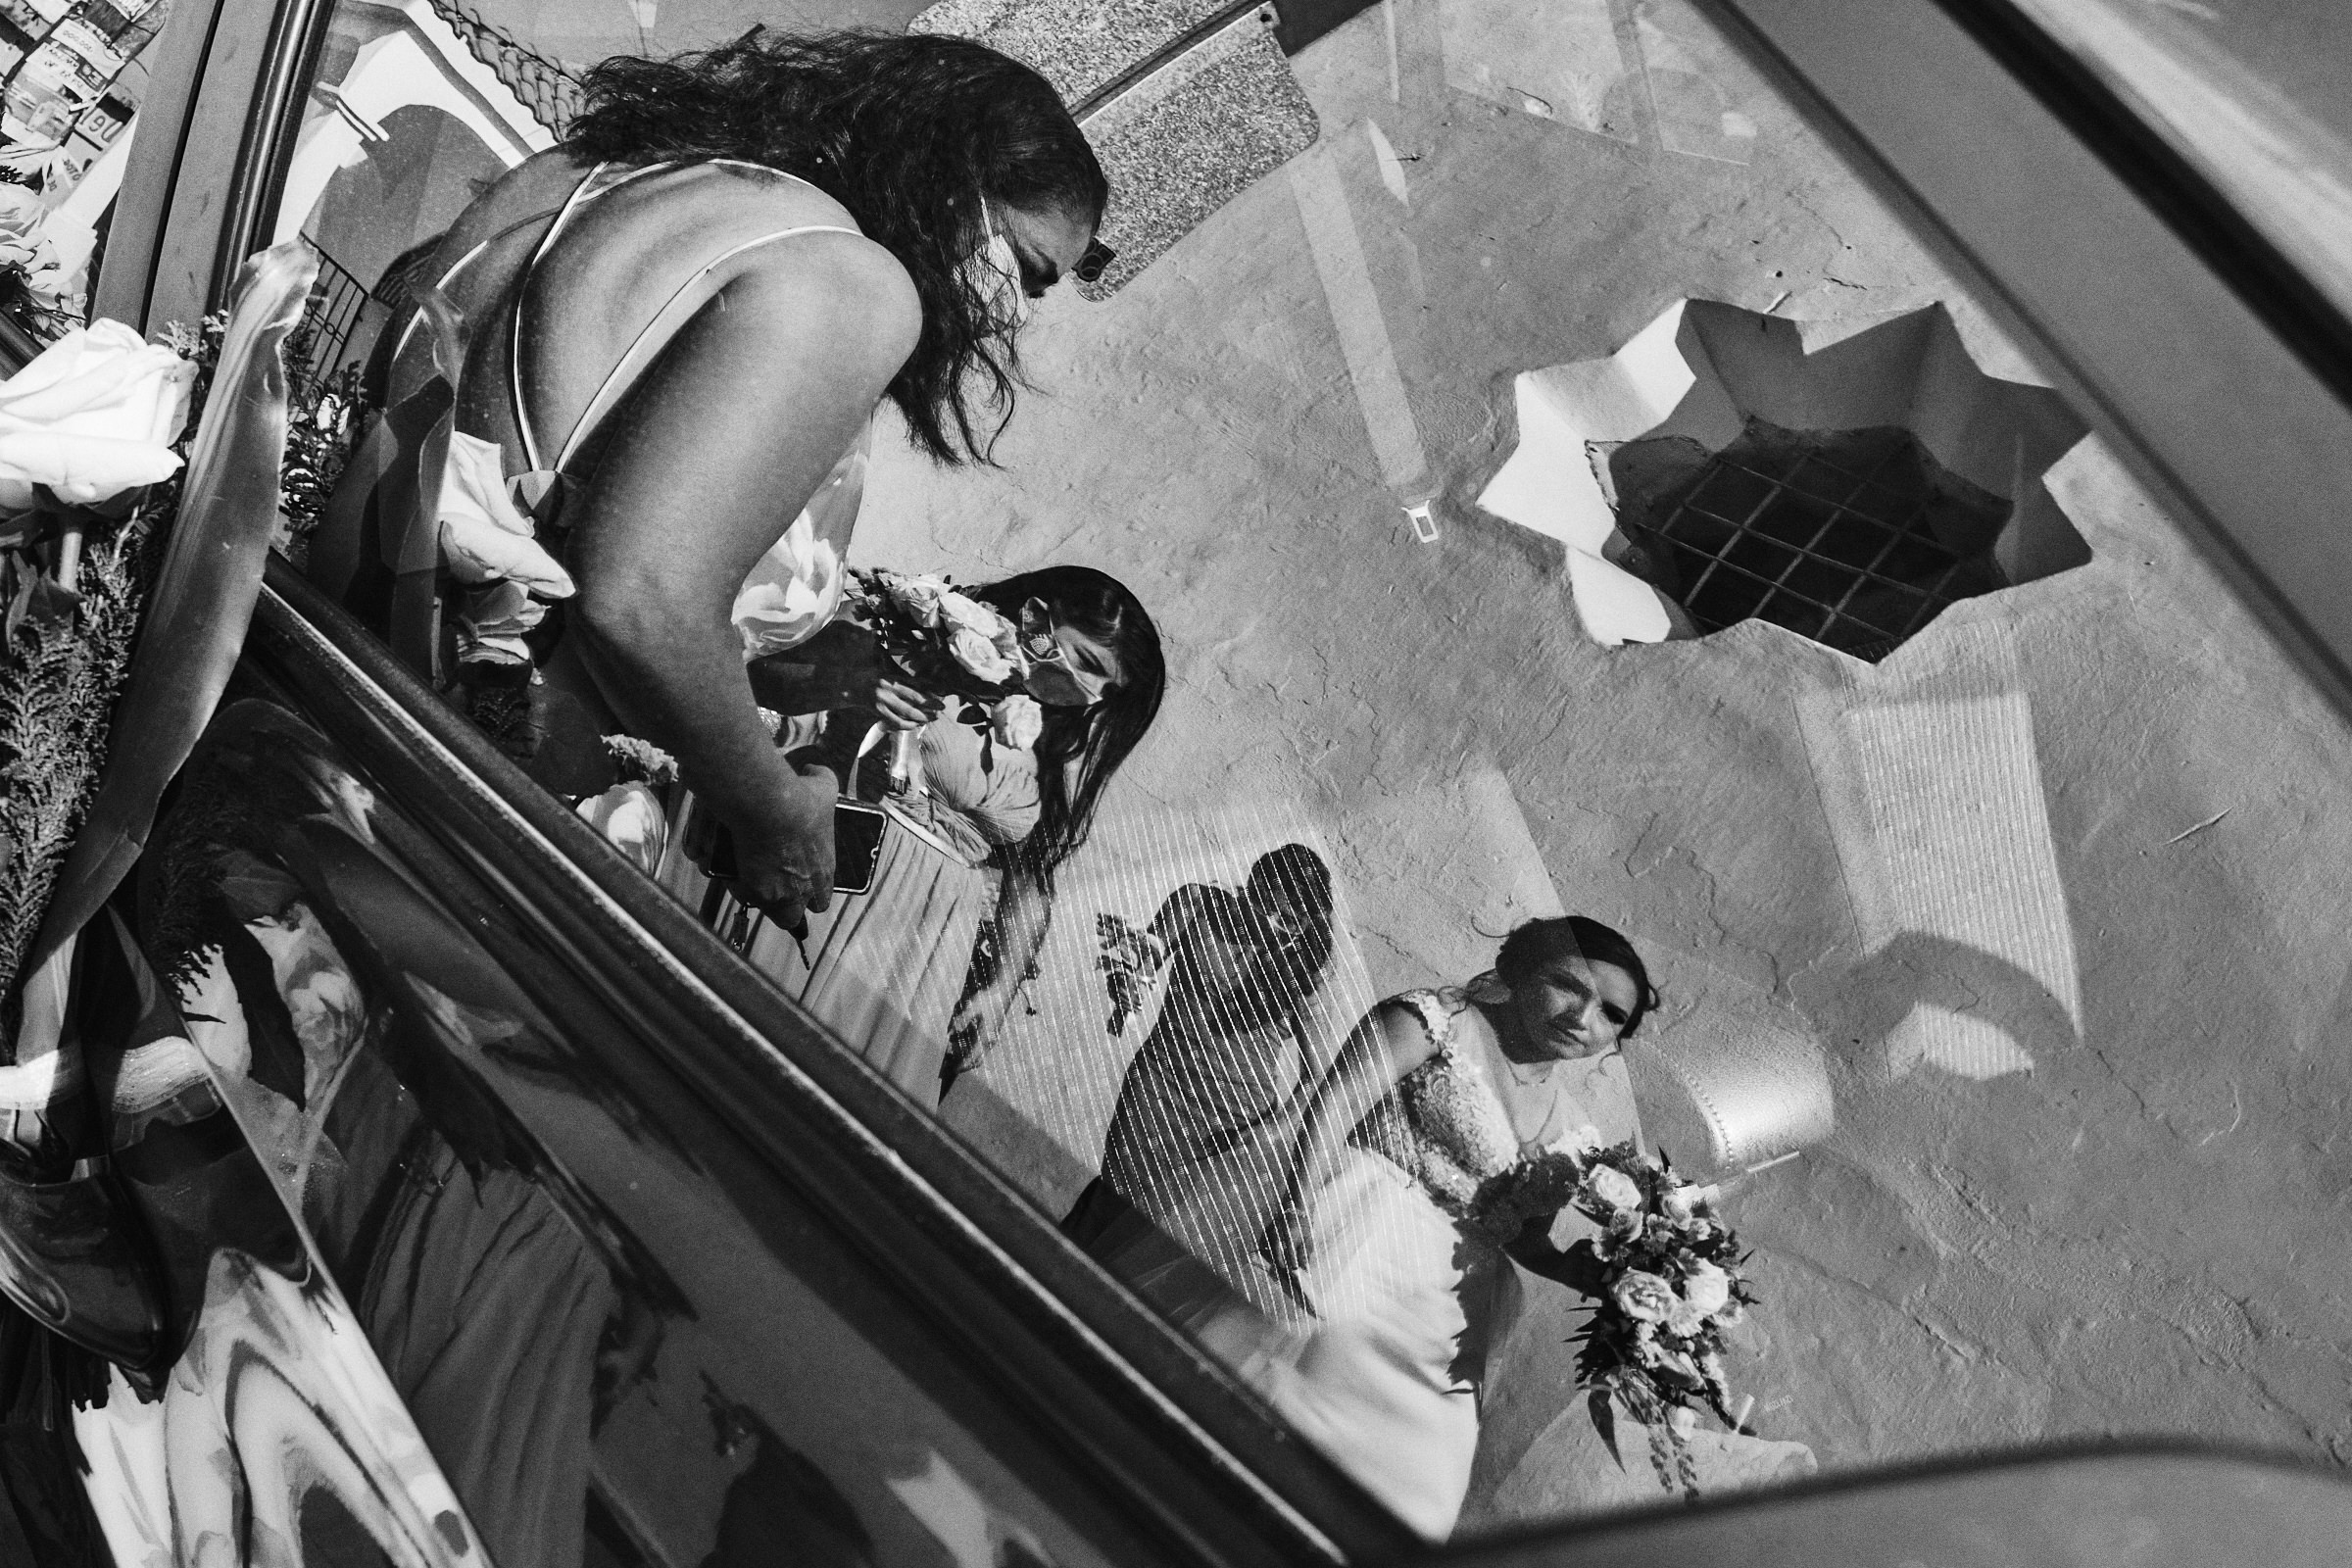 Reflection On Car Glass Of Bride And Her Bridesmaids In Black And White